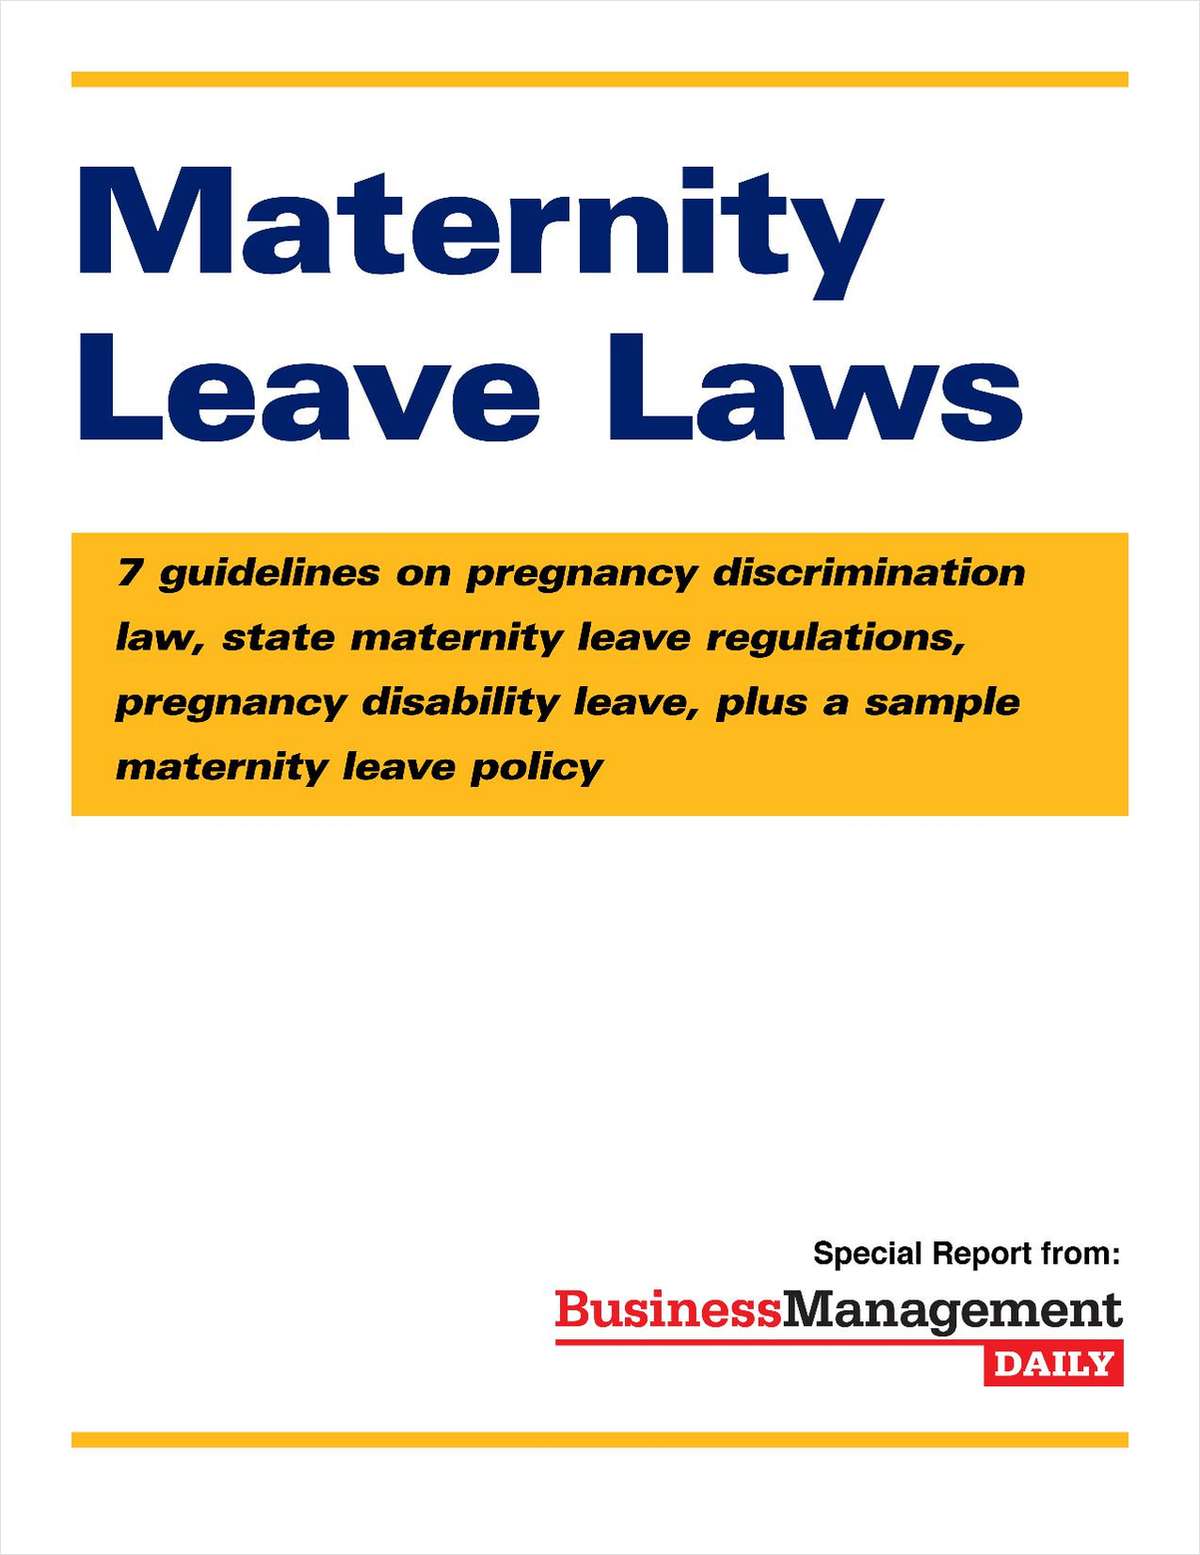 HR Guide for Maternity Leave Laws With FREE Sample Leave Policy Free